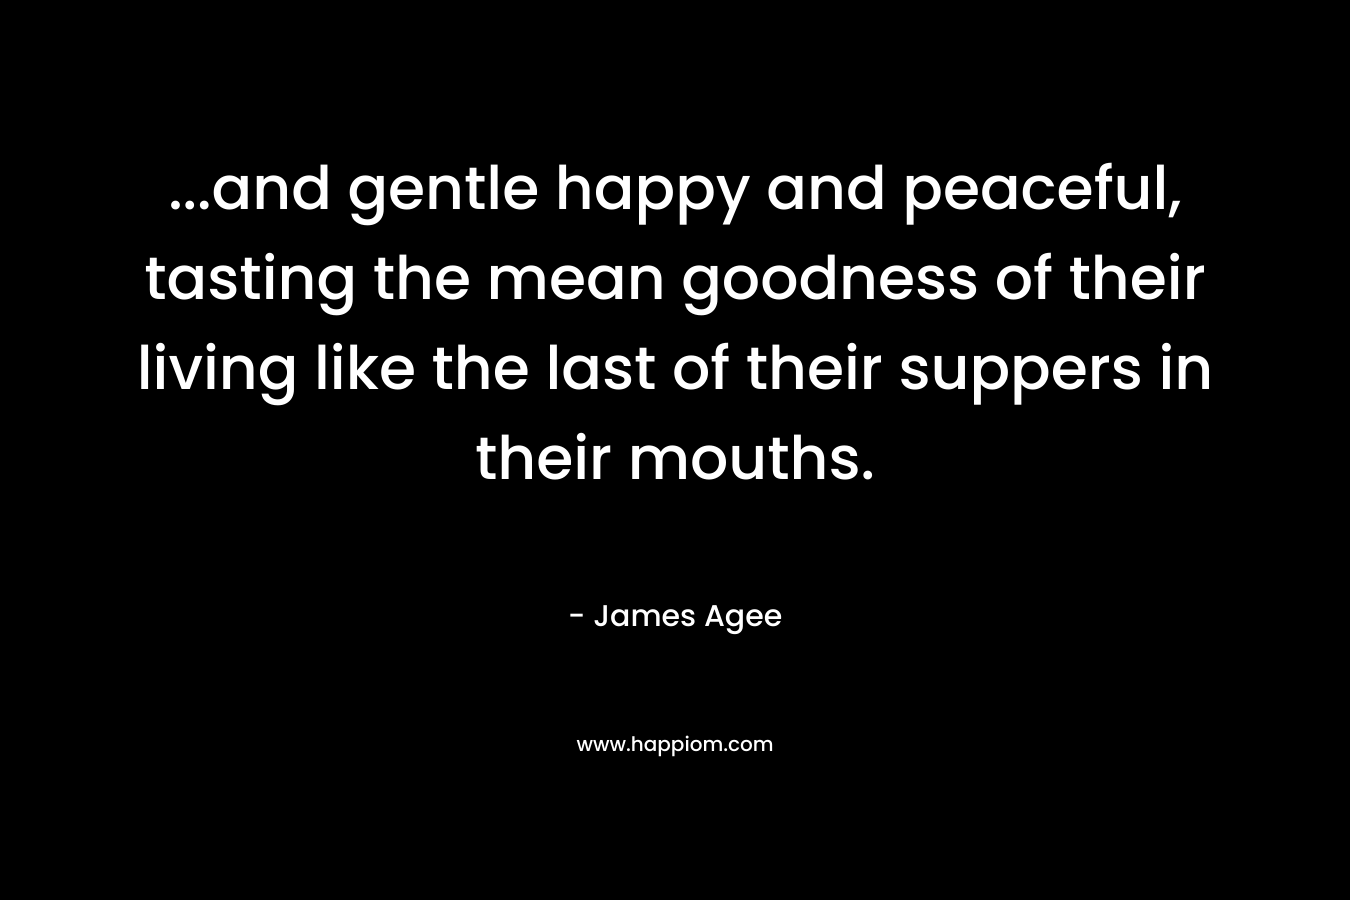 …and gentle happy and peaceful, tasting the mean goodness of their living like the last of their suppers in their mouths. – James Agee